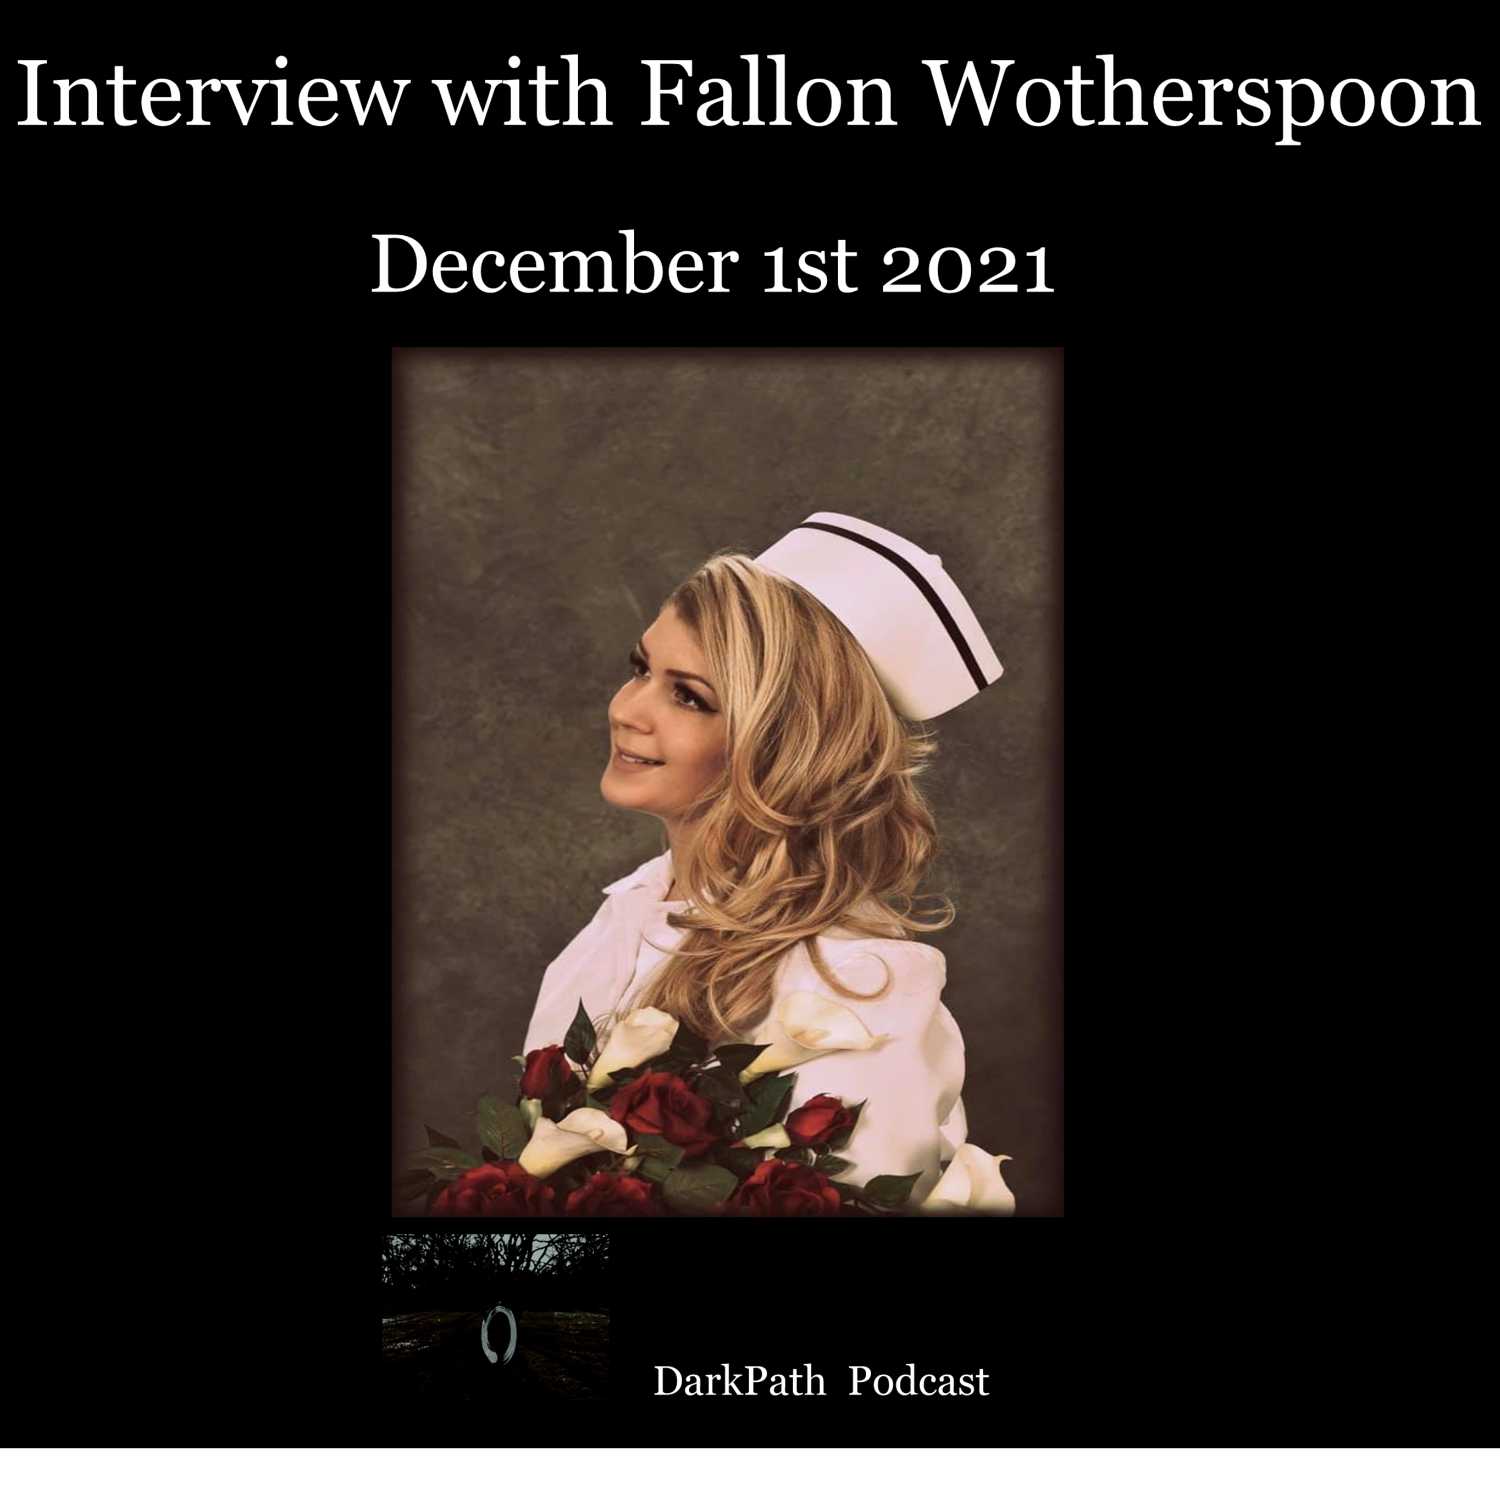 Interview with Fallon Wotherspoon Dec. 1st, 2021